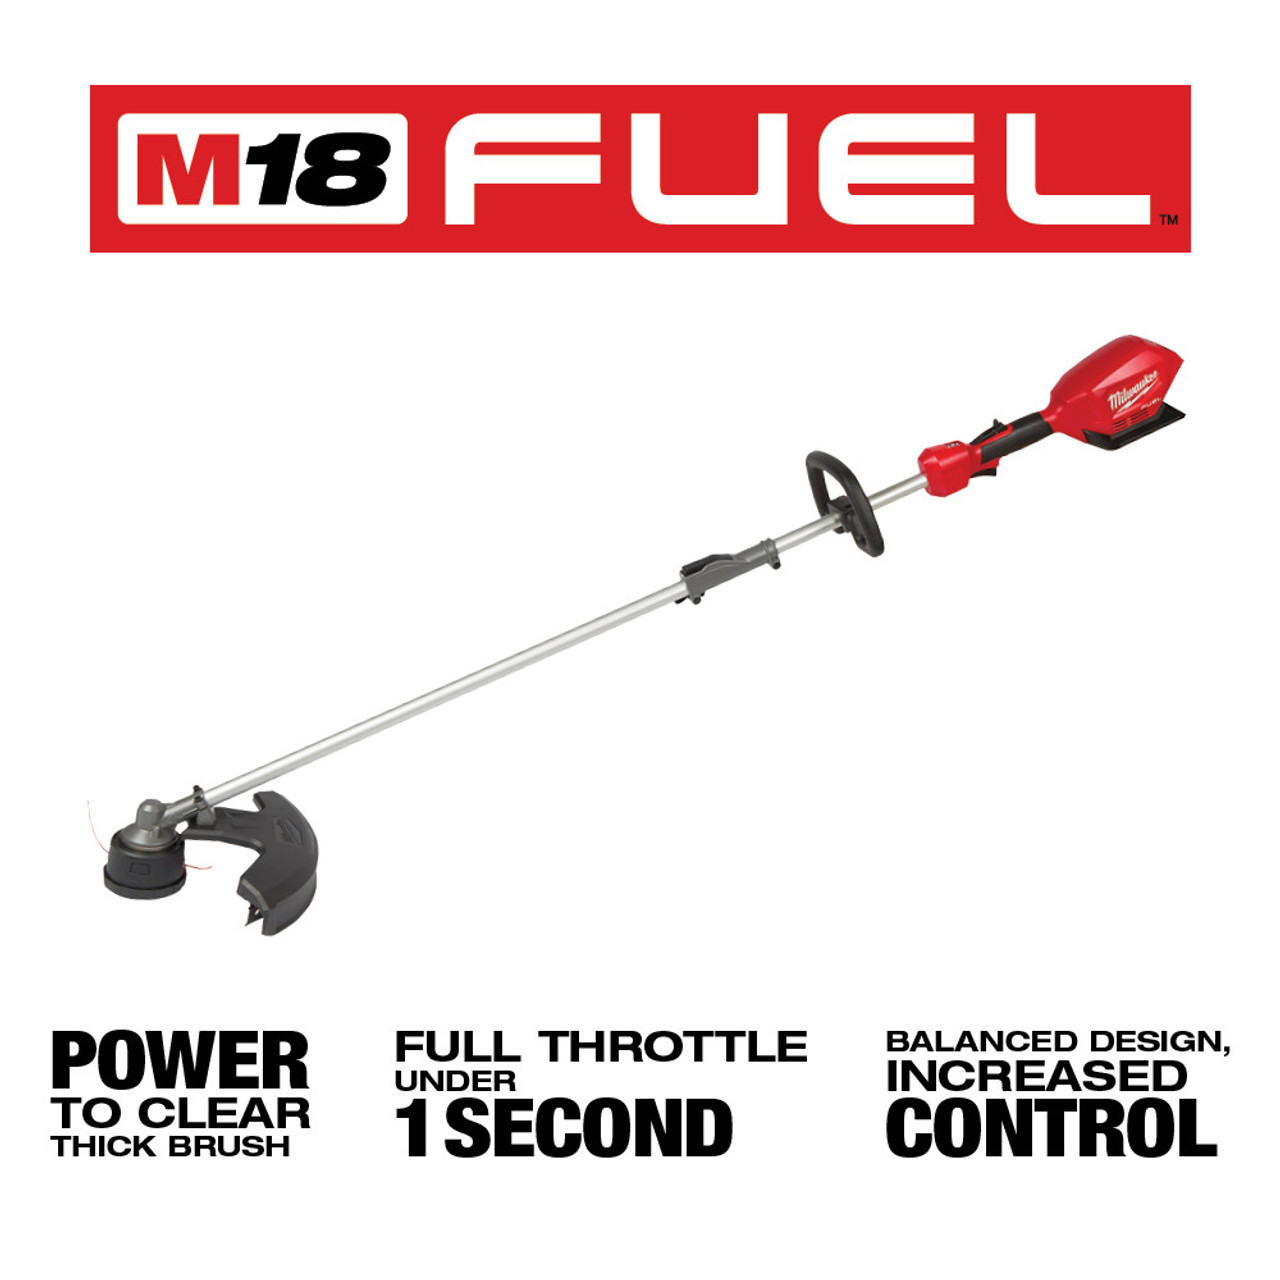 M18 FUEL 18 Volt Lithium-Ion Brushless Cordless String Trimmer